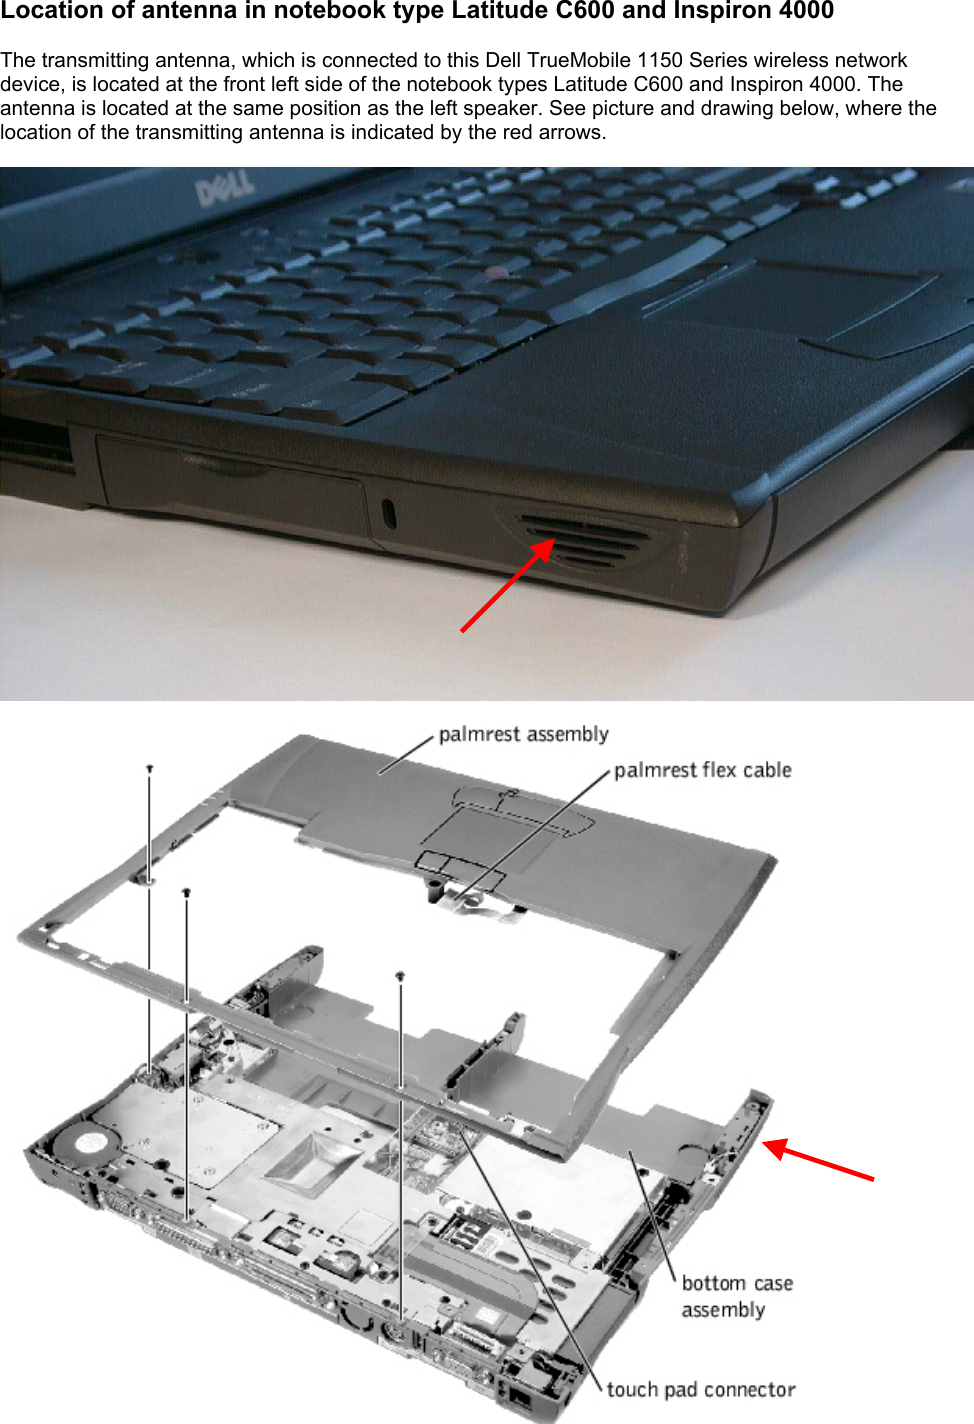 Location of antenna in notebook type Latitude C600 and Inspiron 4000  The transmitting antenna, which is connected to this Dell TrueMobile 1150 Series wireless network device, is located at the front left side of the notebook types Latitude C600 and Inspiron 4000. The antenna is located at the same position as the left speaker. See picture and drawing below, where the location of the transmitting antenna is indicated by the red arrows.       